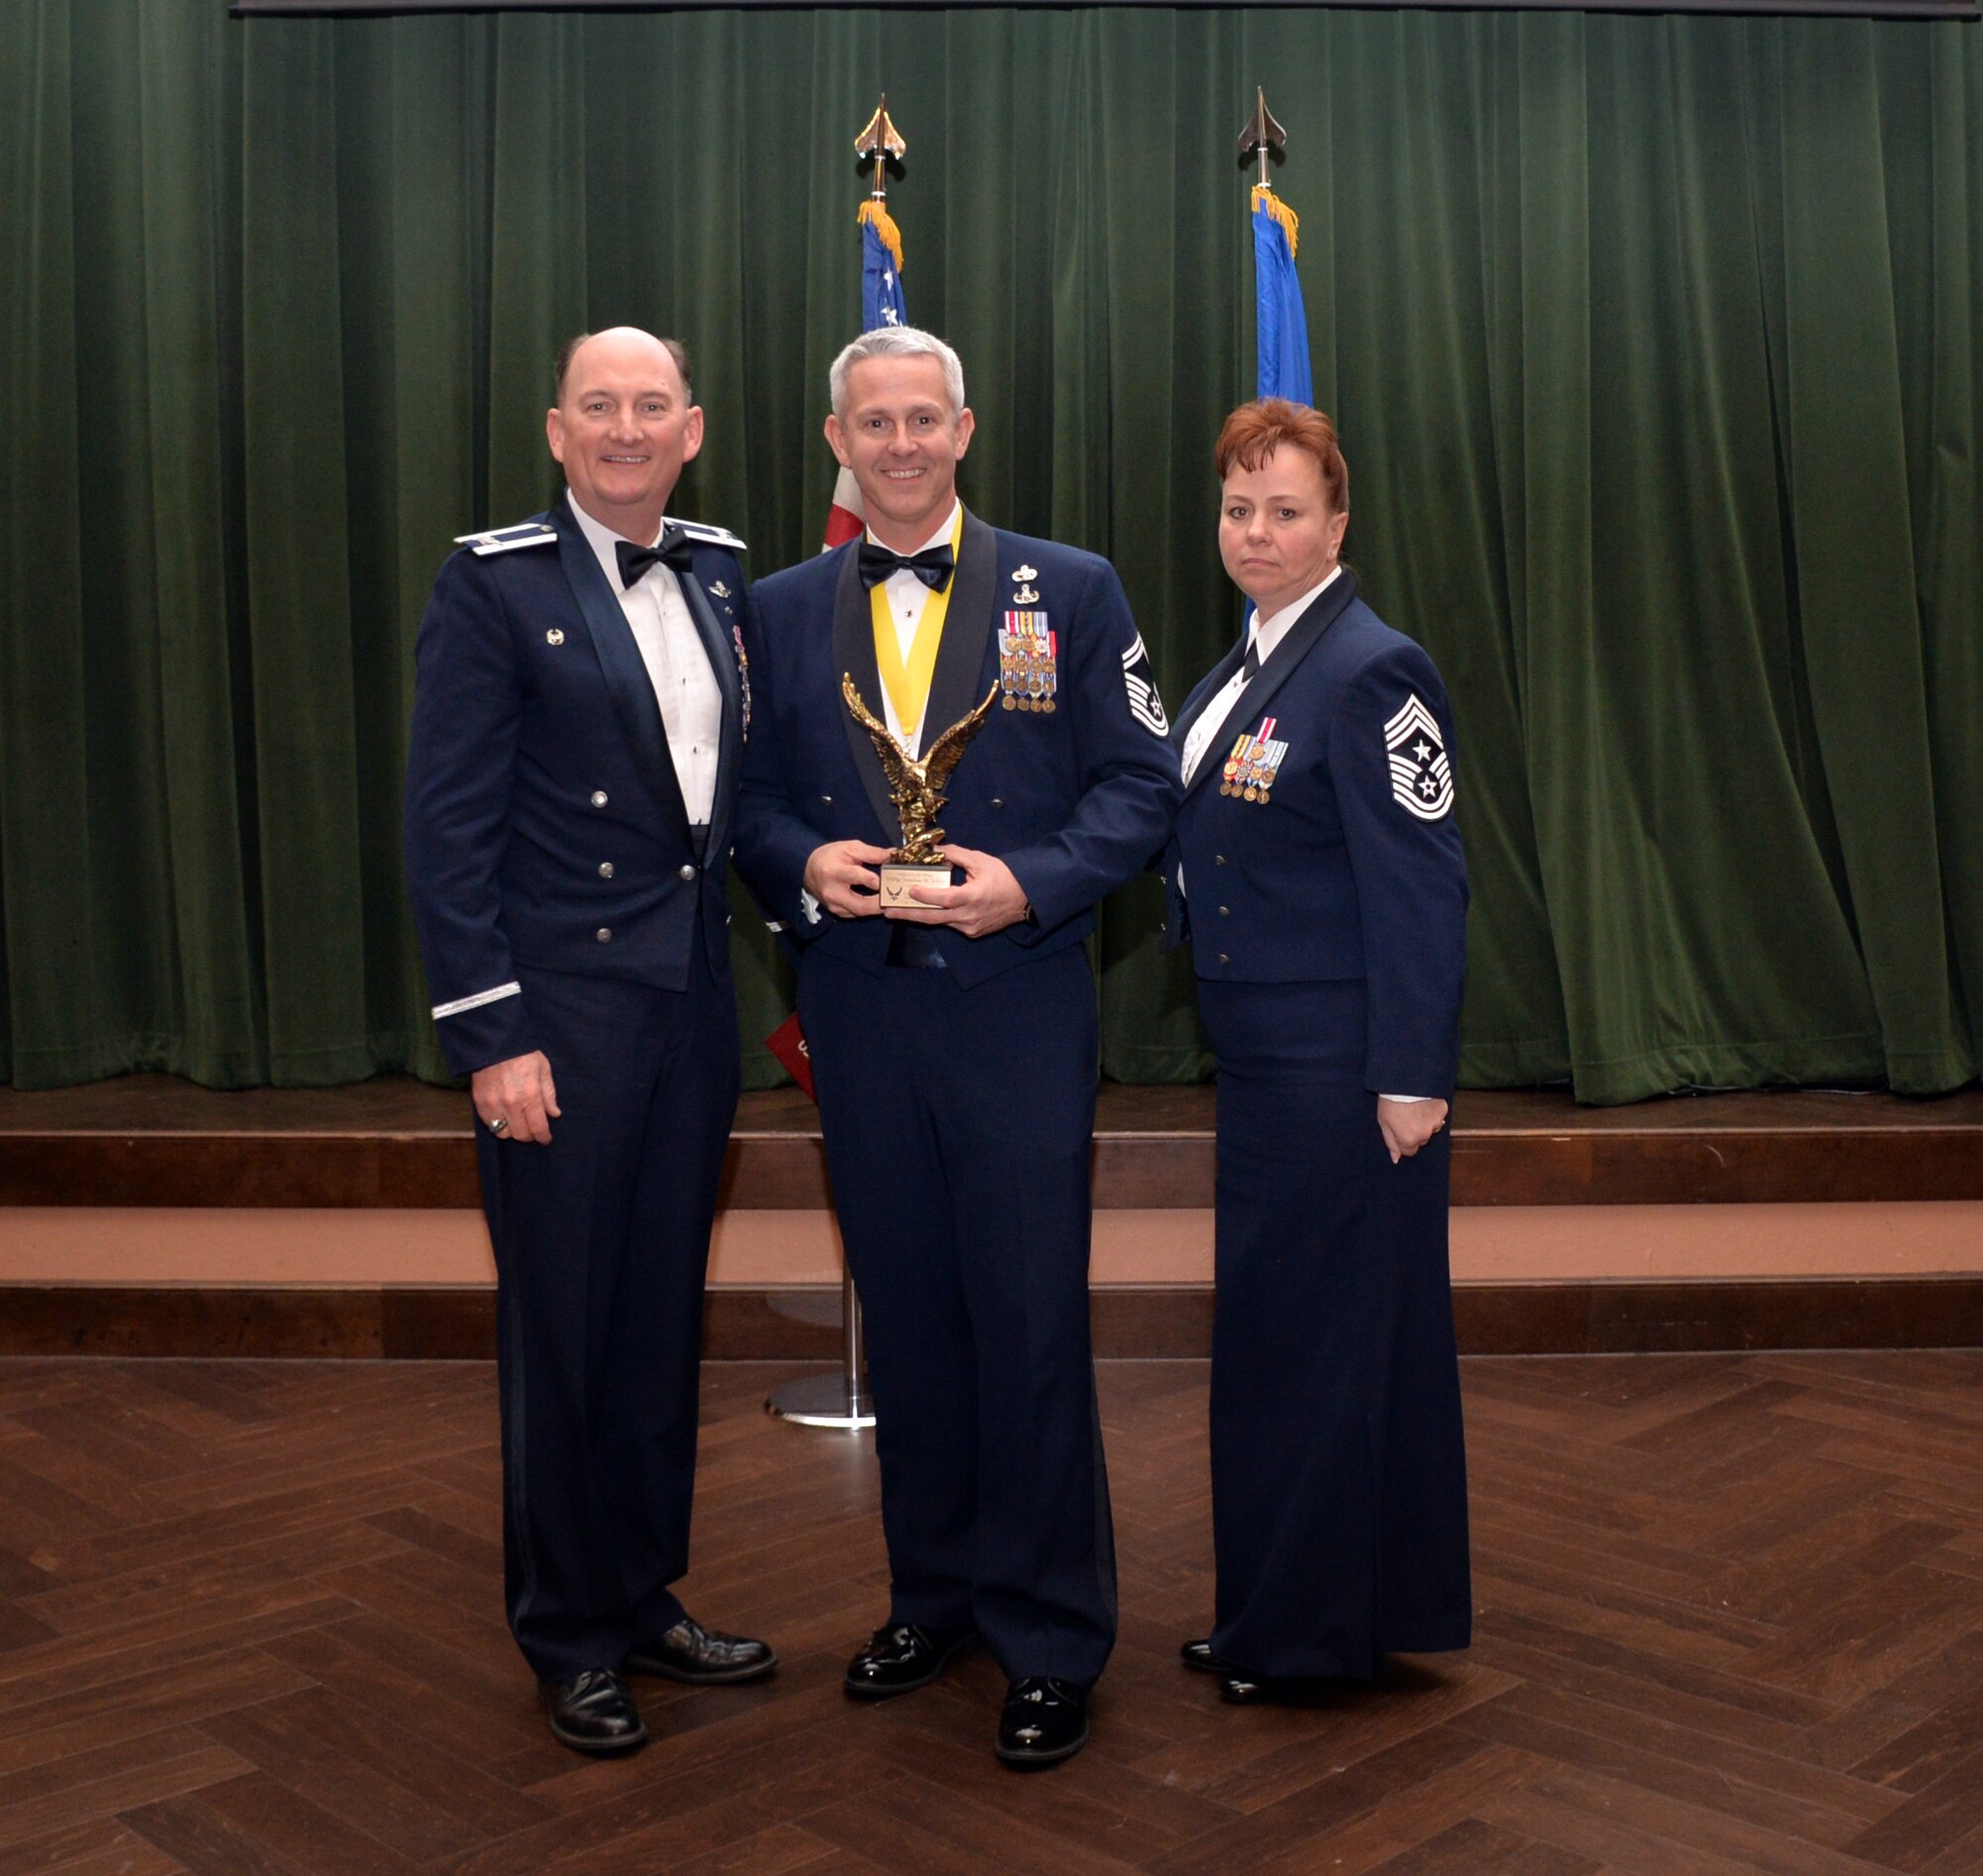 ol. Thomas K. Smith, 433rd Airlift Wing commander, and 433rd AW Command Chief Master Sgt. Shana C. Cullum, award Senior Master Sgt. Jonathan Sellers, 26th Aerial Port Squadron, as the Senior Noncommissioned Officer of the Year at the 433rd AW annual awards banquet at Joint Base San Antonio-Lackland, Texas Feb. 9, 2019.